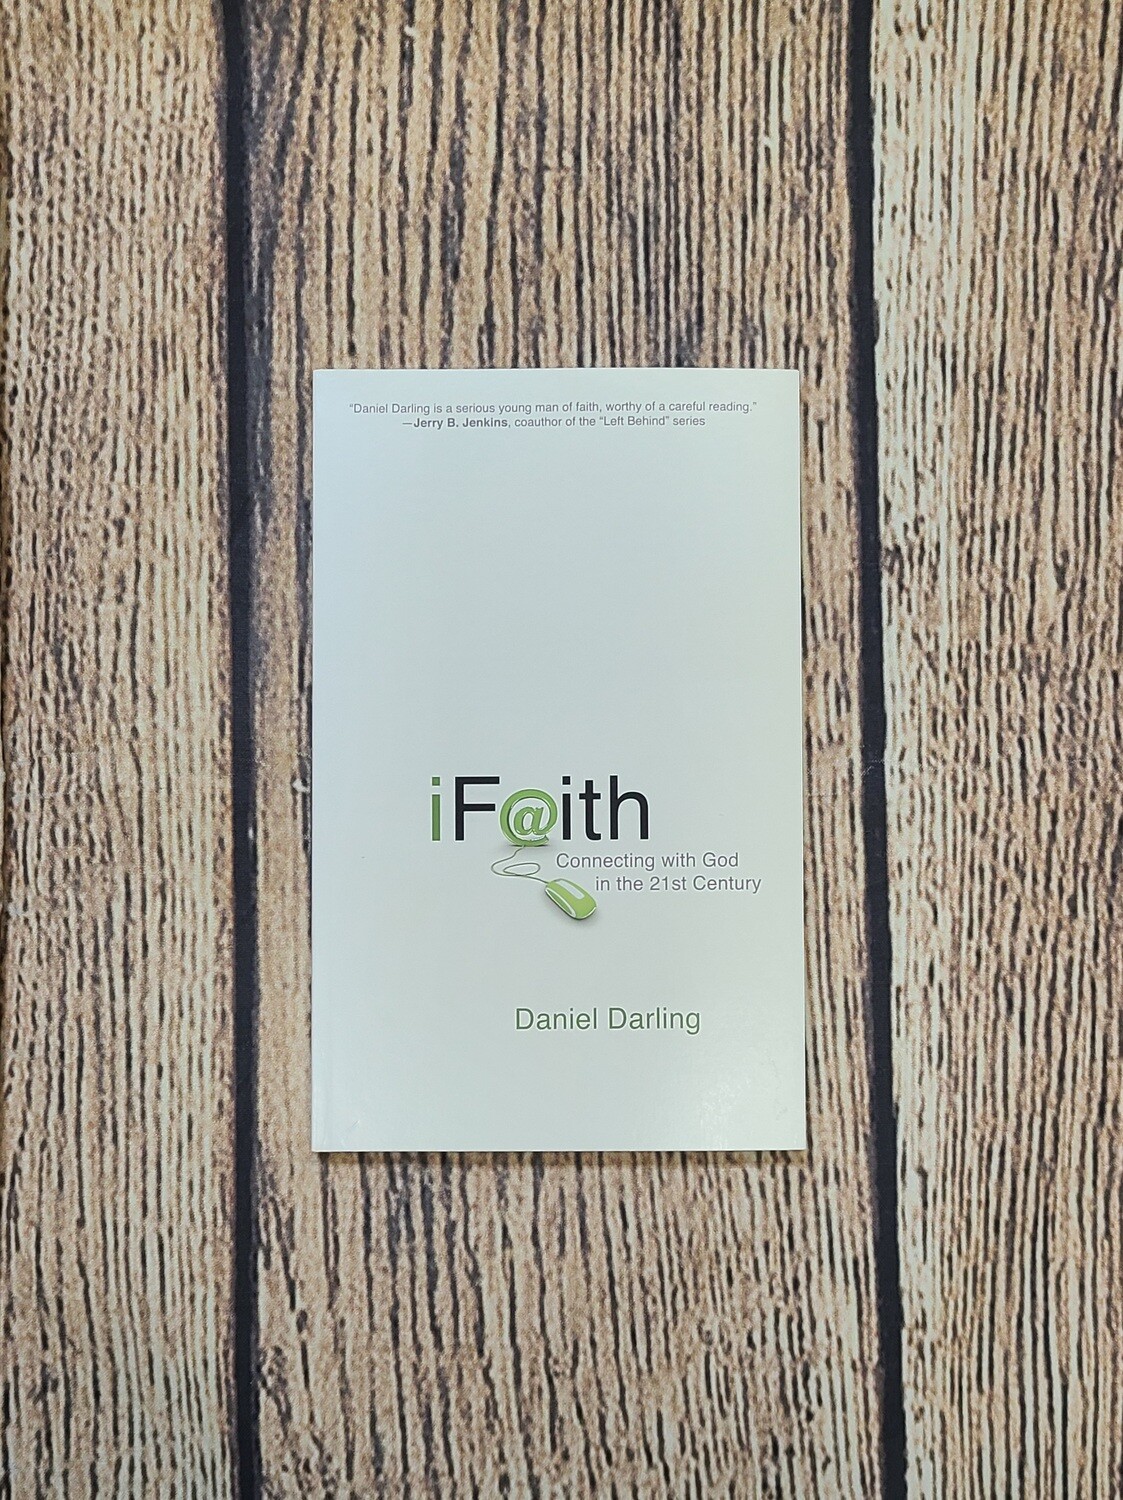 iFaith: Connecting with God in the 21st Century by Daniel Darling